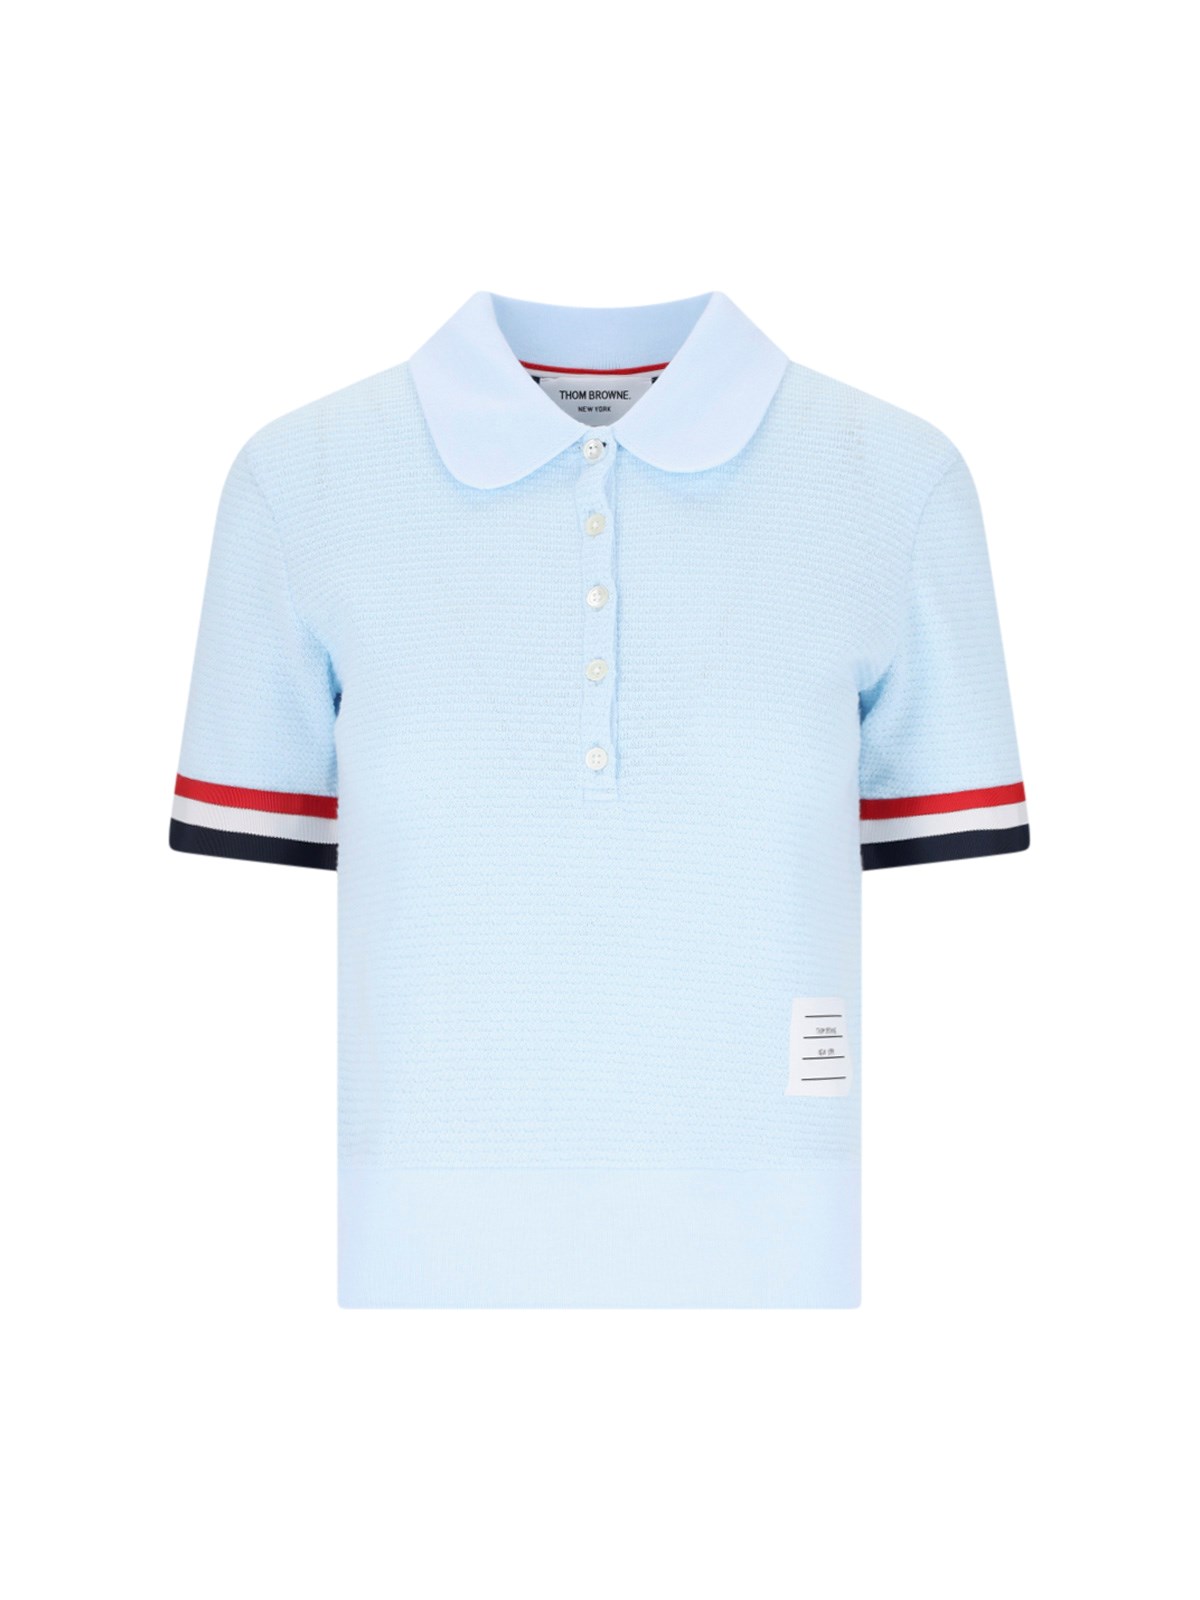 Thom Browne Polo Shirt Tricolor Details In Light Blue